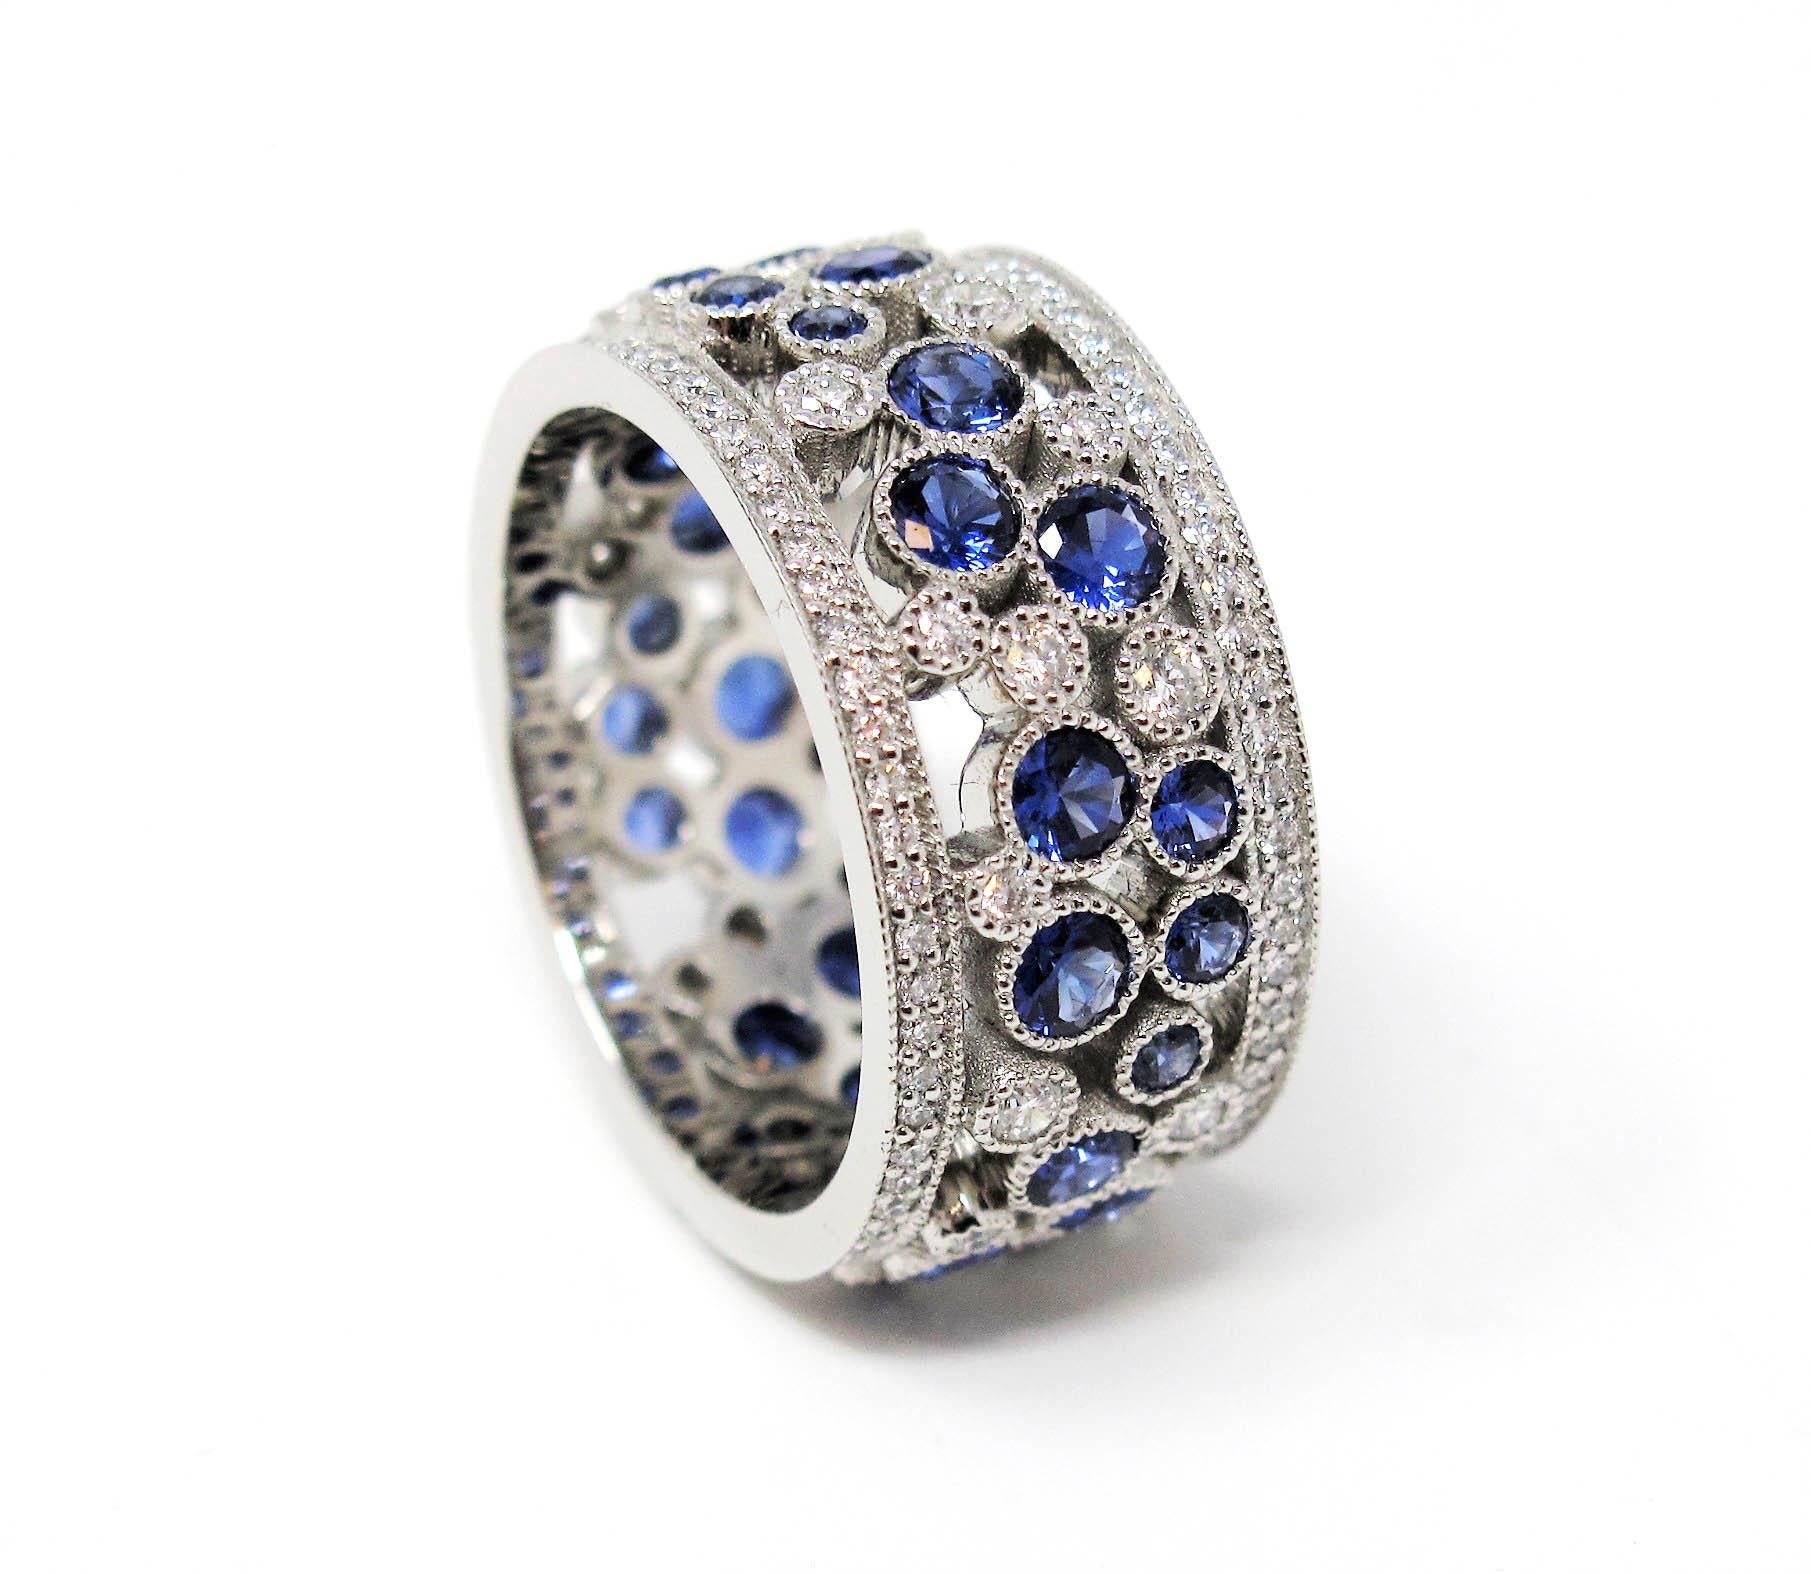 Stunningly sparkly Cobblestone band ring from Tiffany & Co. This amazing piece is filled with  dazzling white diamonds and sparkling blue sapphires set in a playful path of cobblestones throughout the ring. You'll simply adore how these exceptional